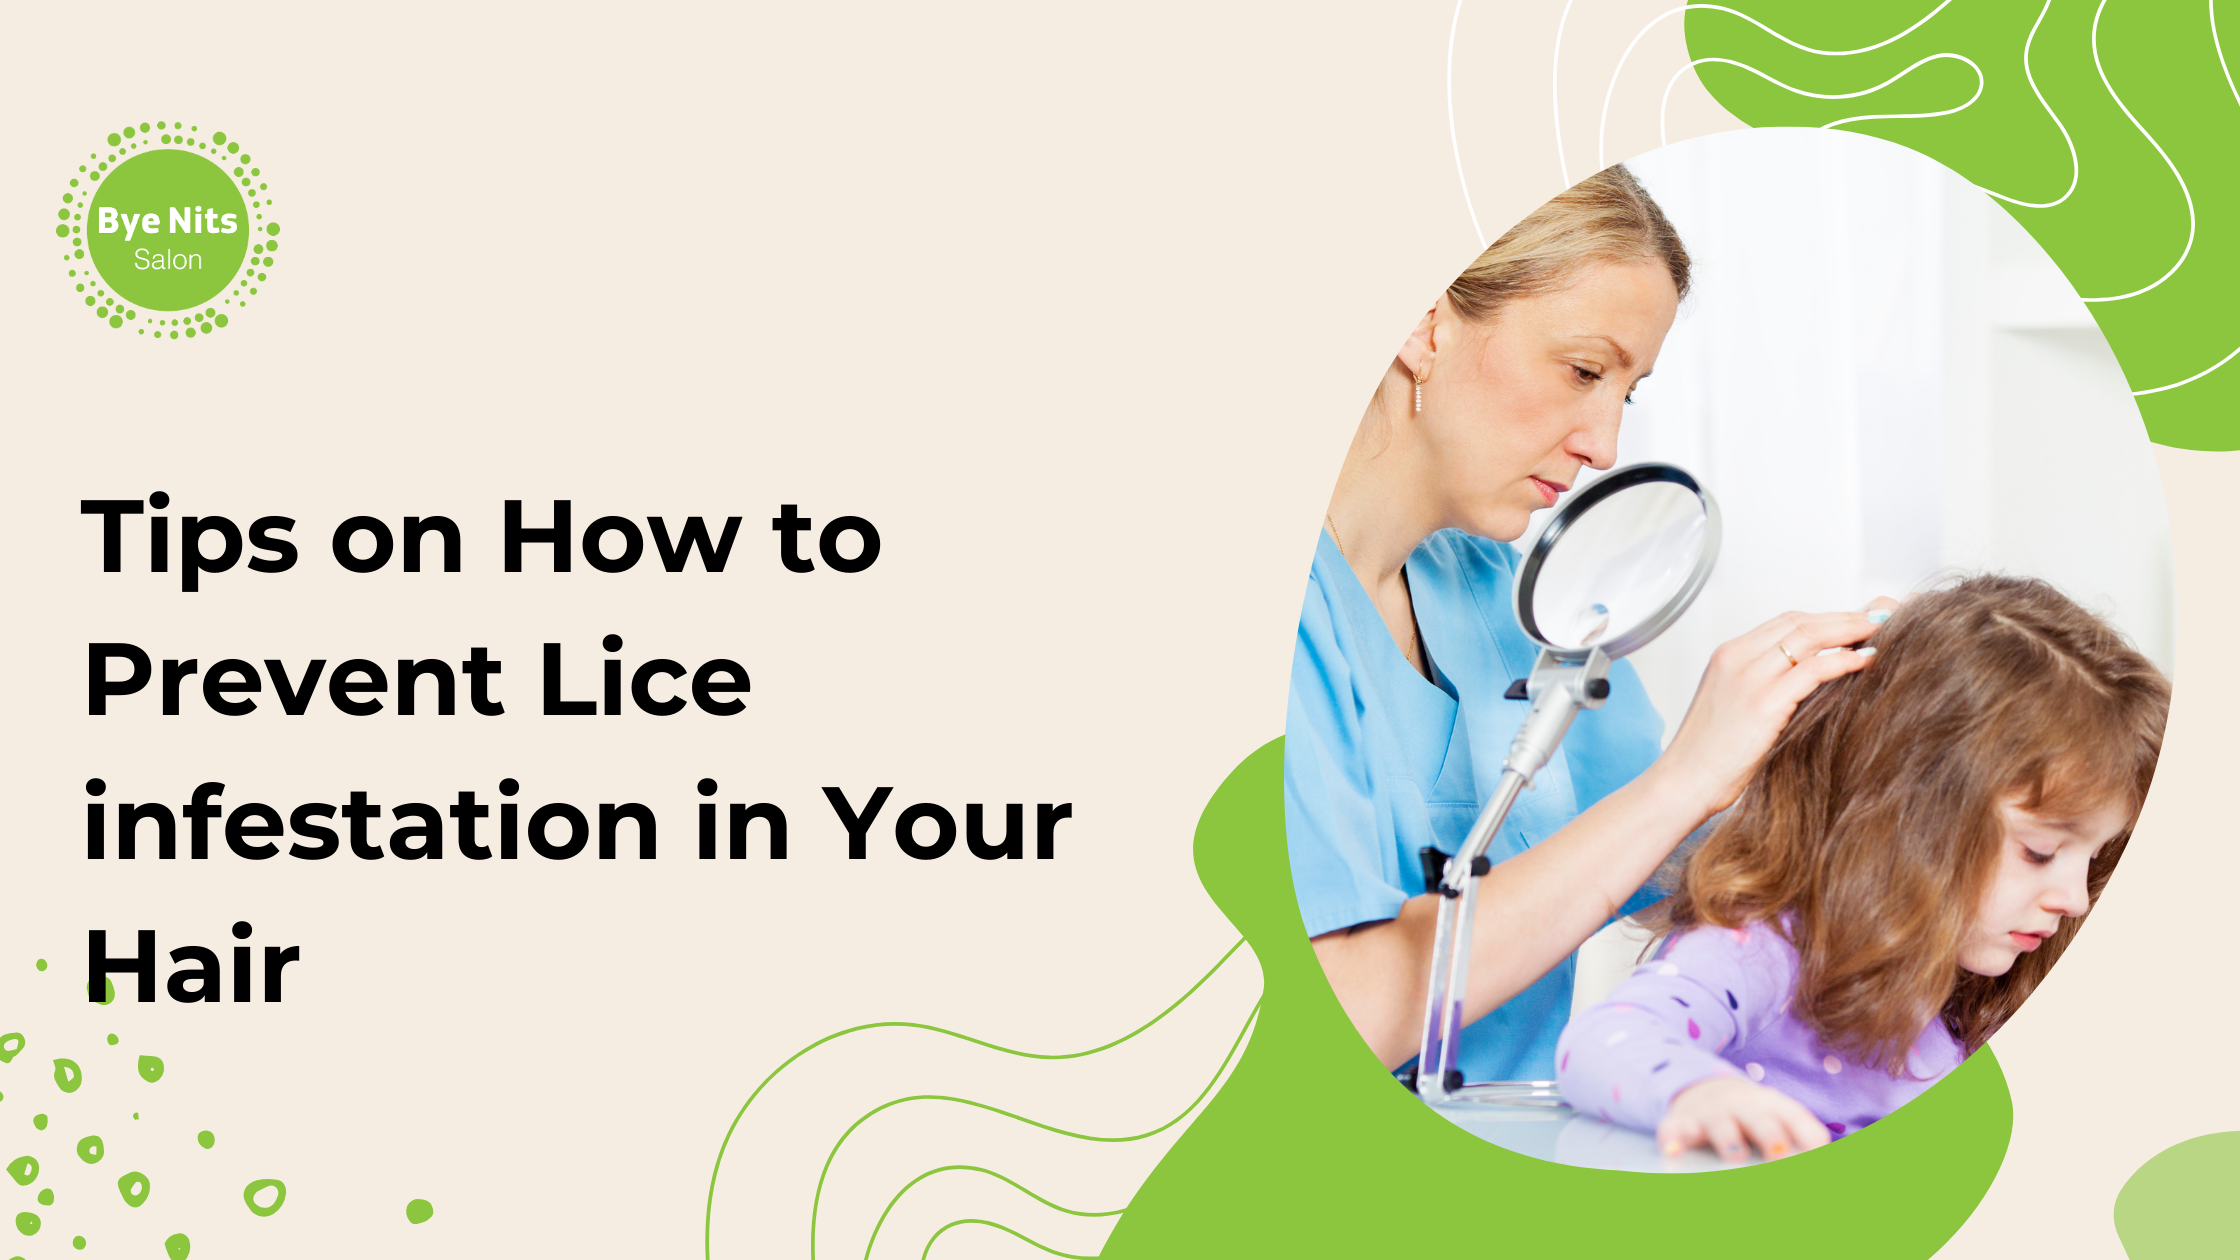 Tips on How to Prevent Lice infestation in Your Hair